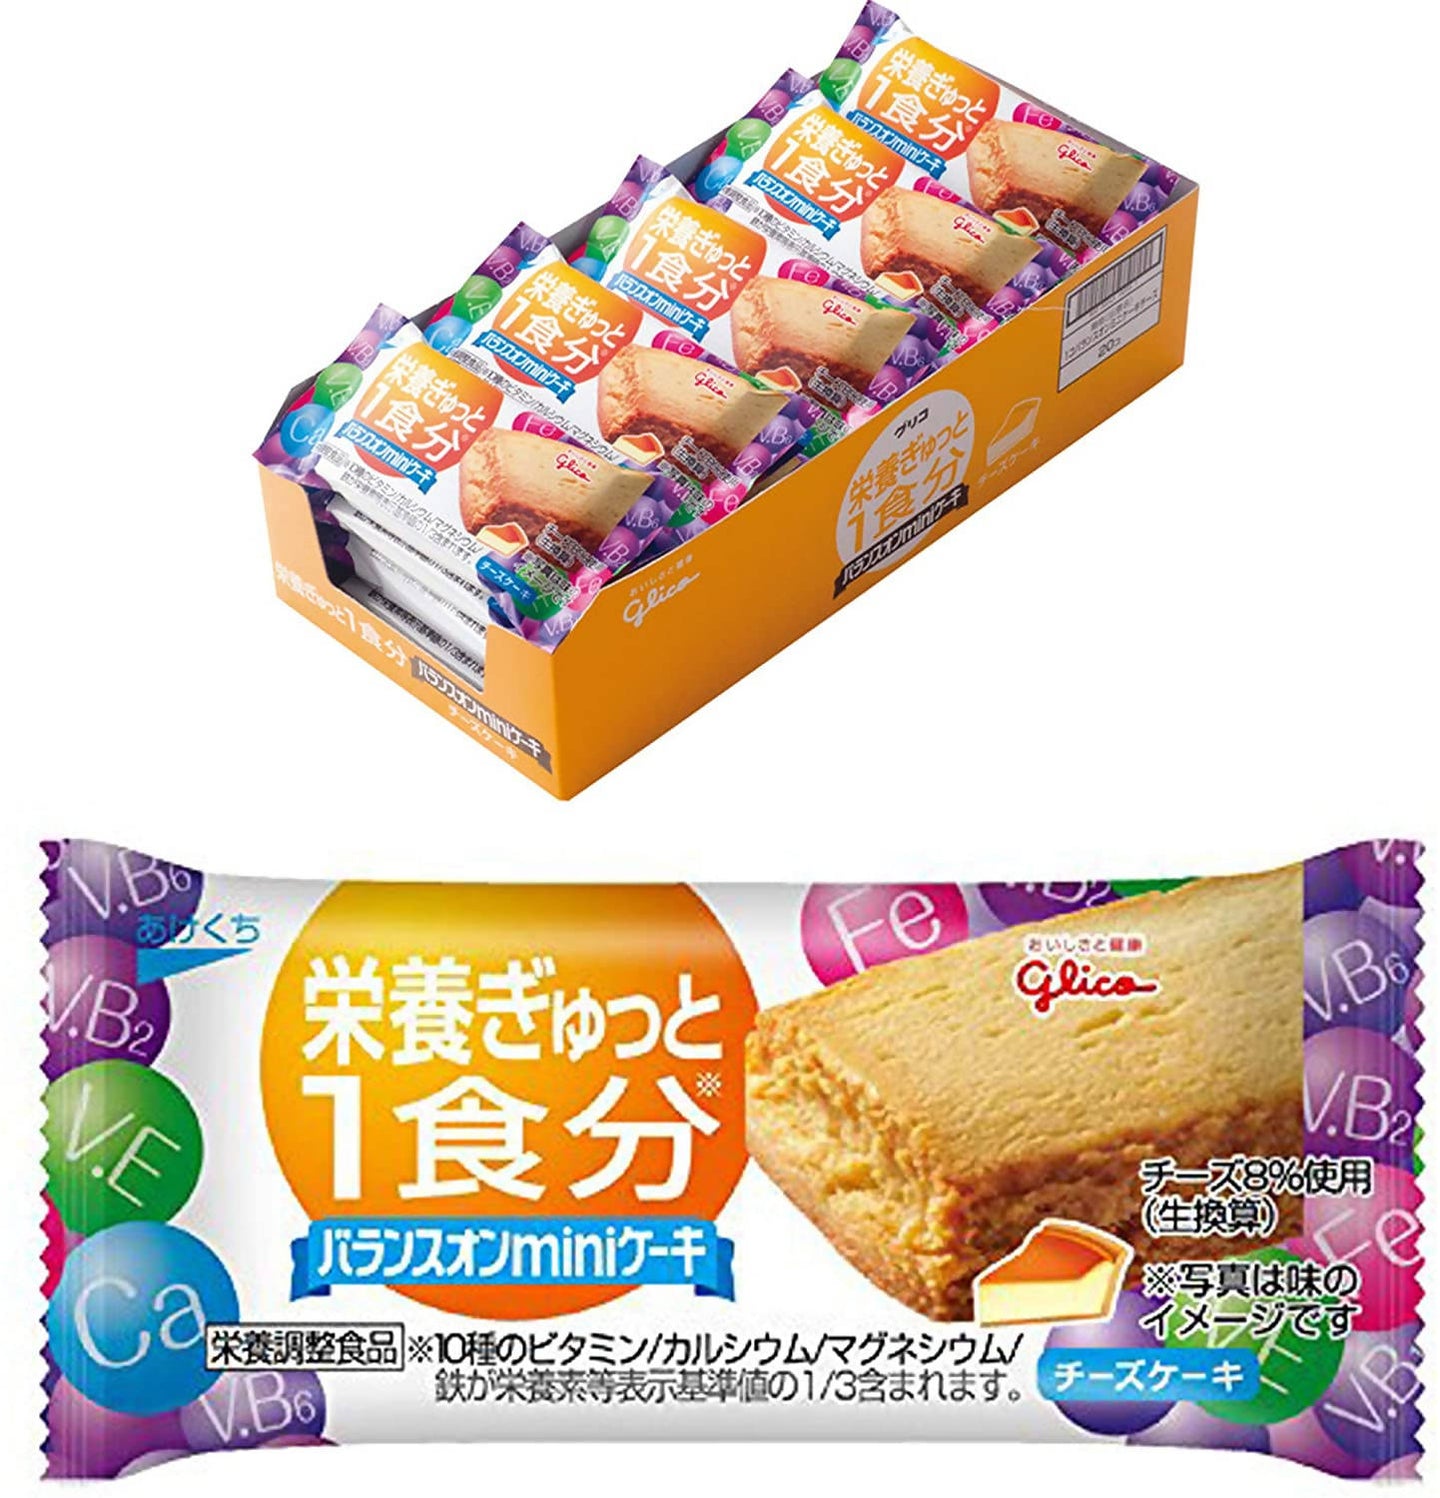 GLICO Mini Cake Cheesecake Nutrition Bar – 20 Pieces – #1 Best Seller in Japan